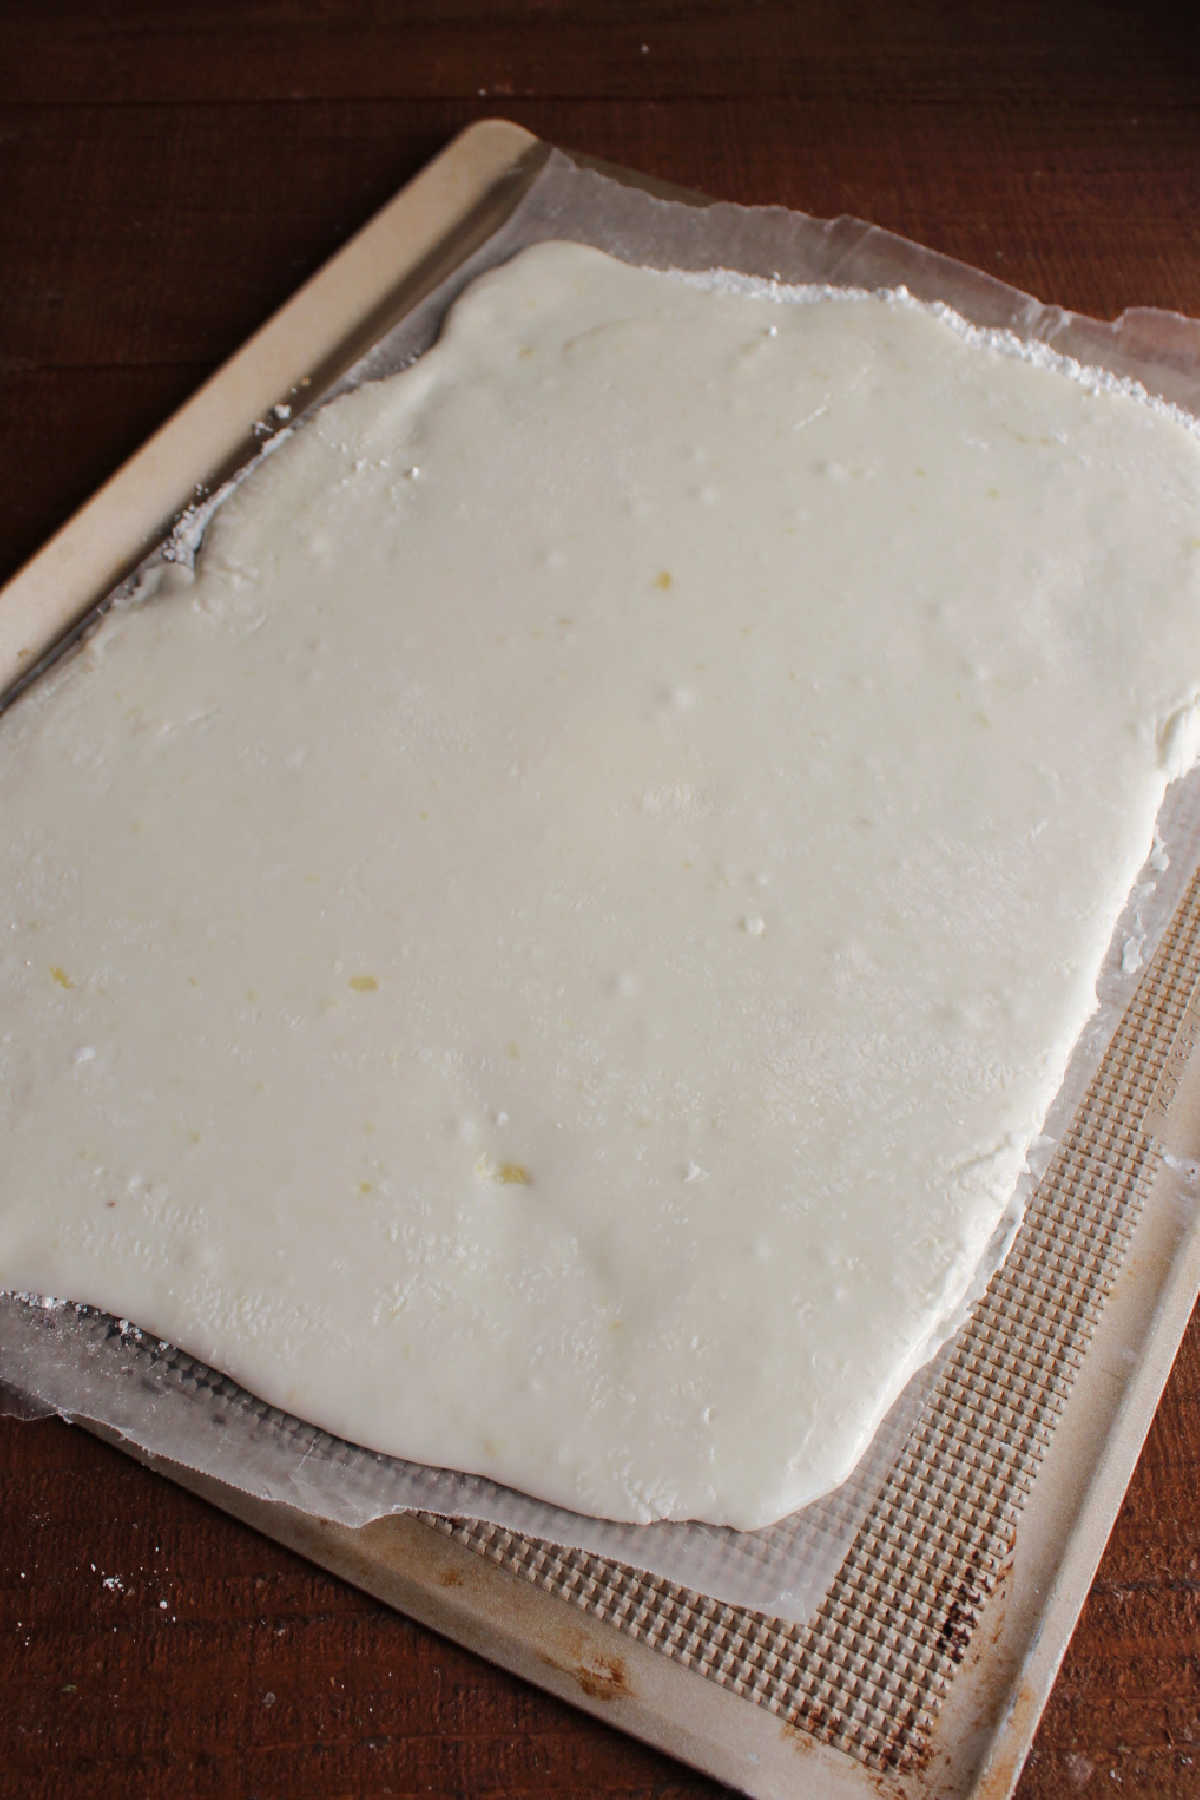 Mashed potato mixture rolled into a thin rectangle on a sheet of wax paper.